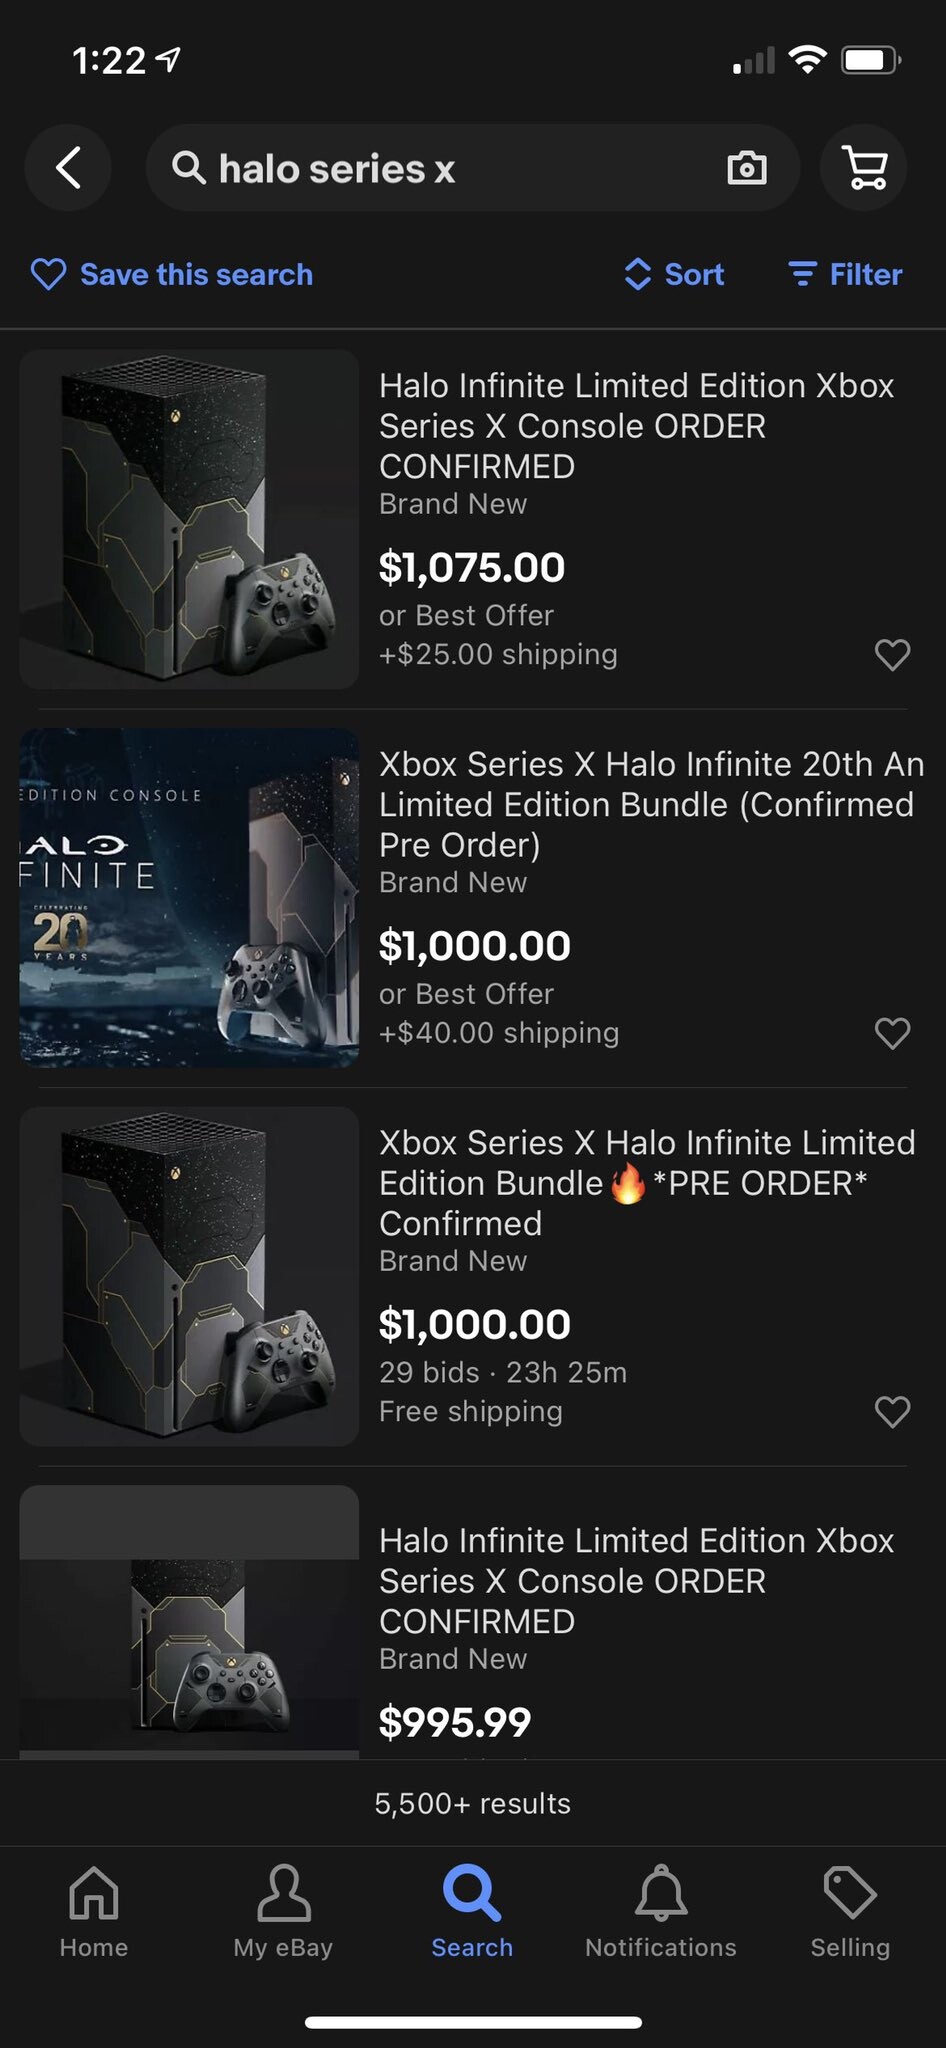 The Halo Series on Xbox